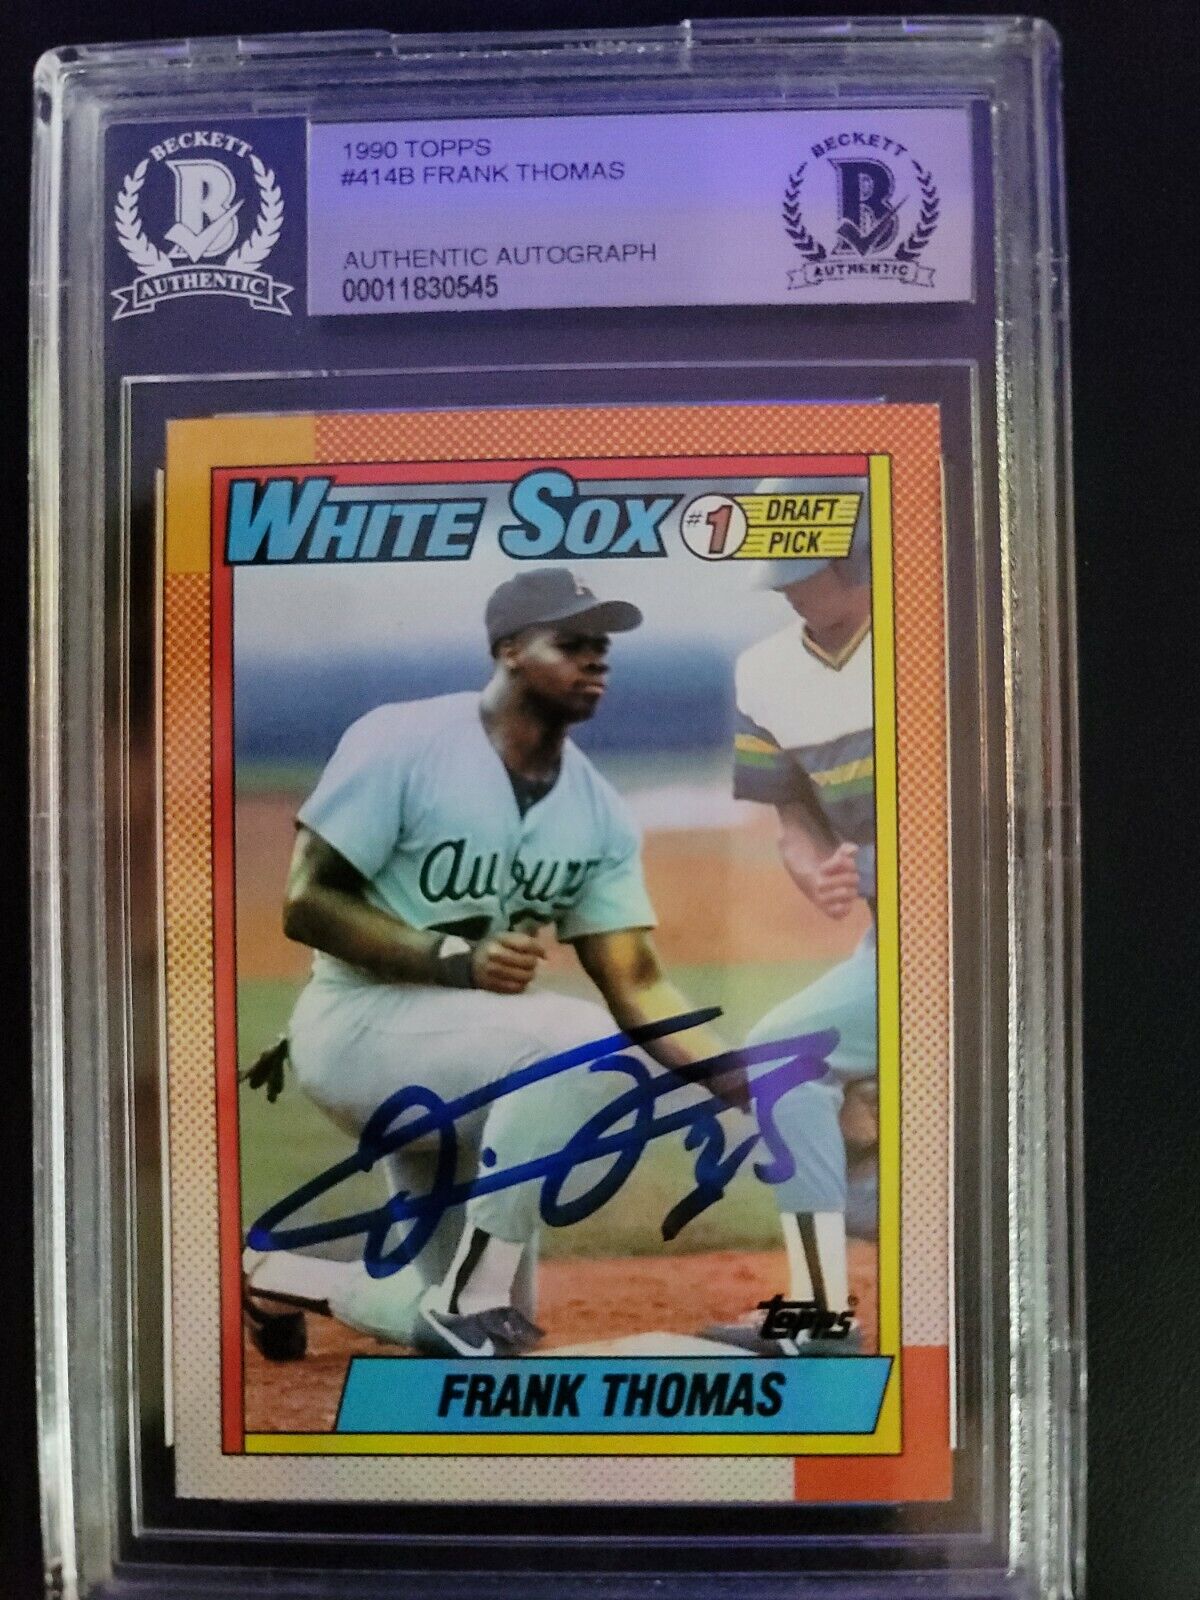 1990 Topps Frank Thomas Rookie Card #414 Autographed 